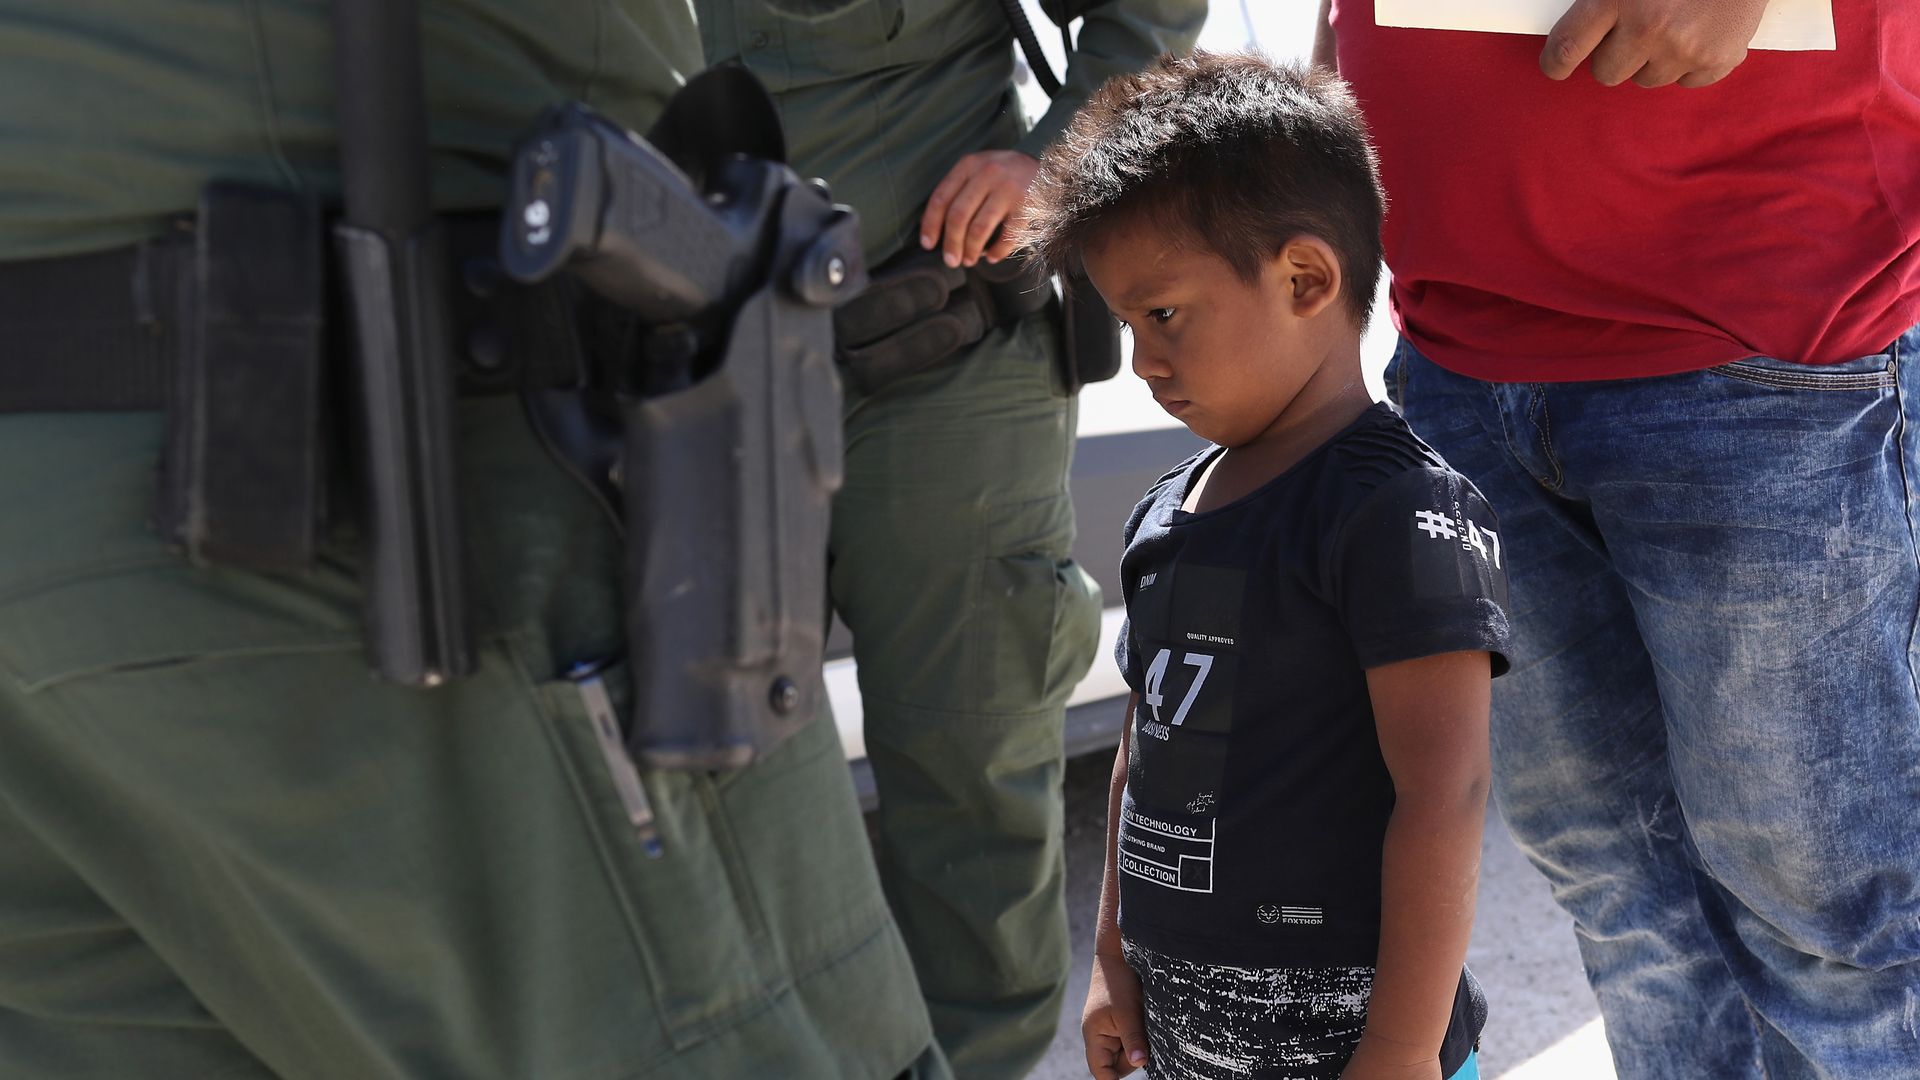 A migrant child is surrounded by border patrol officers